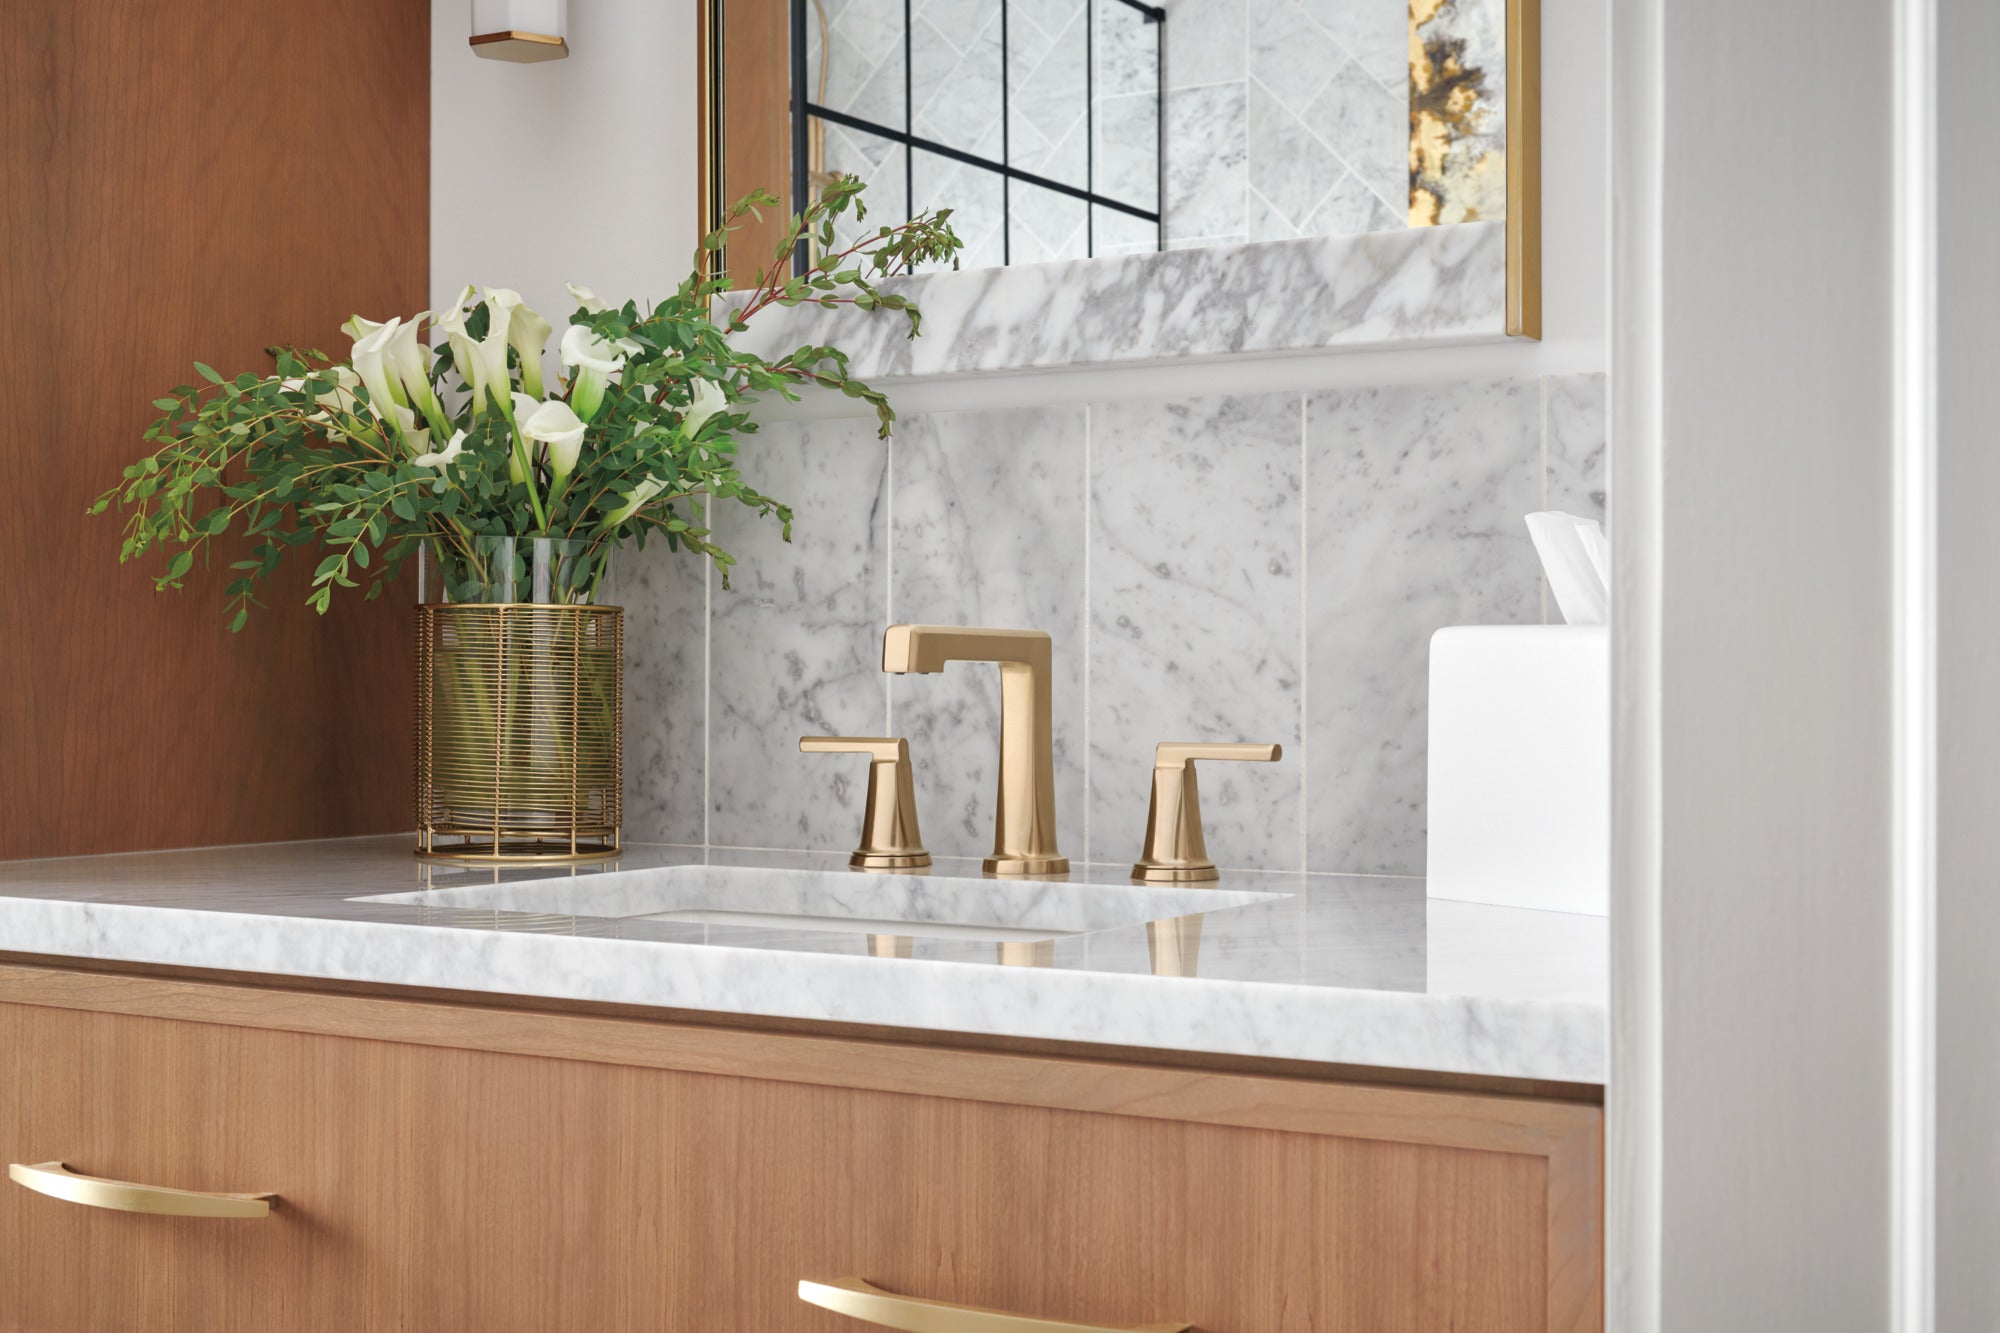 luxe gold lavatory faucet